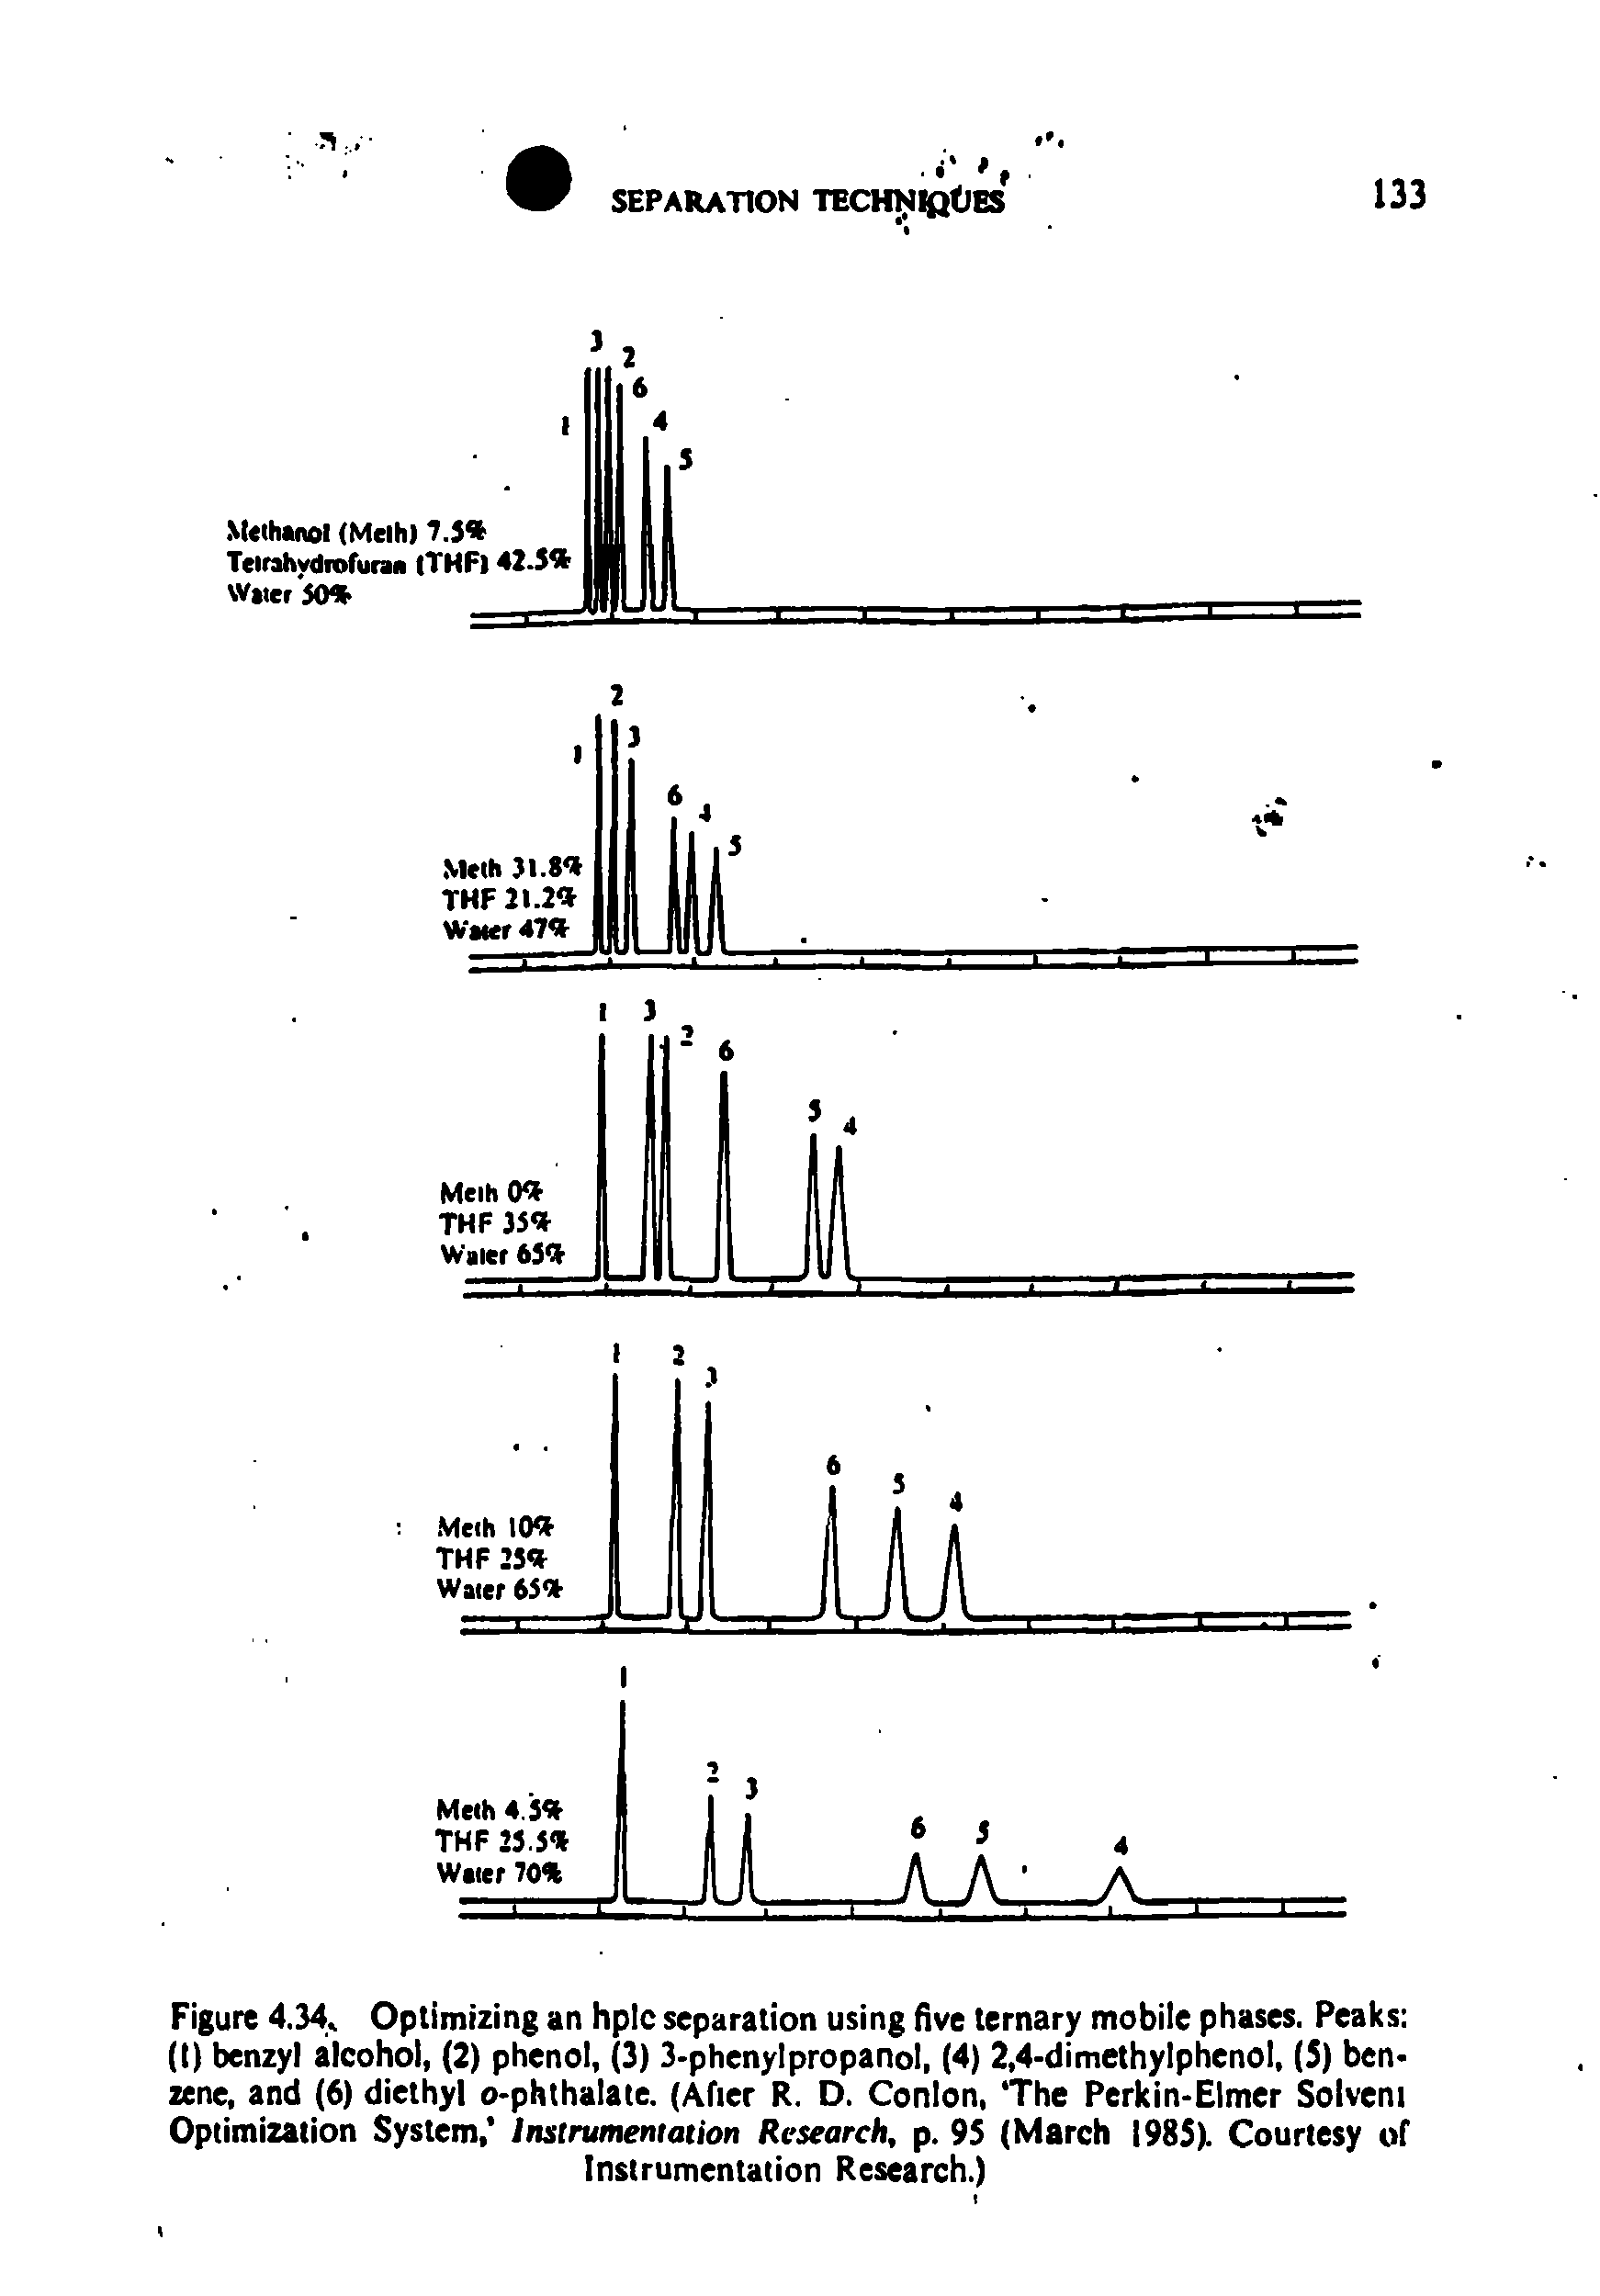 Figure 4.34 Optimizing an hplc separation using five ternary mobile phases. Peaks (t) benzyl alcohol, (2) phenol, (3) 3-phenylpropanol, (4) 2,4-dimethylphenol, (3) ben zene, and (6) diethyl o phthalate. (After R. D. Conlon, The Perkin-Elmer Solvent Optimization System, Instrumentation Research, p. 95 (March 1985). Courtesy of...